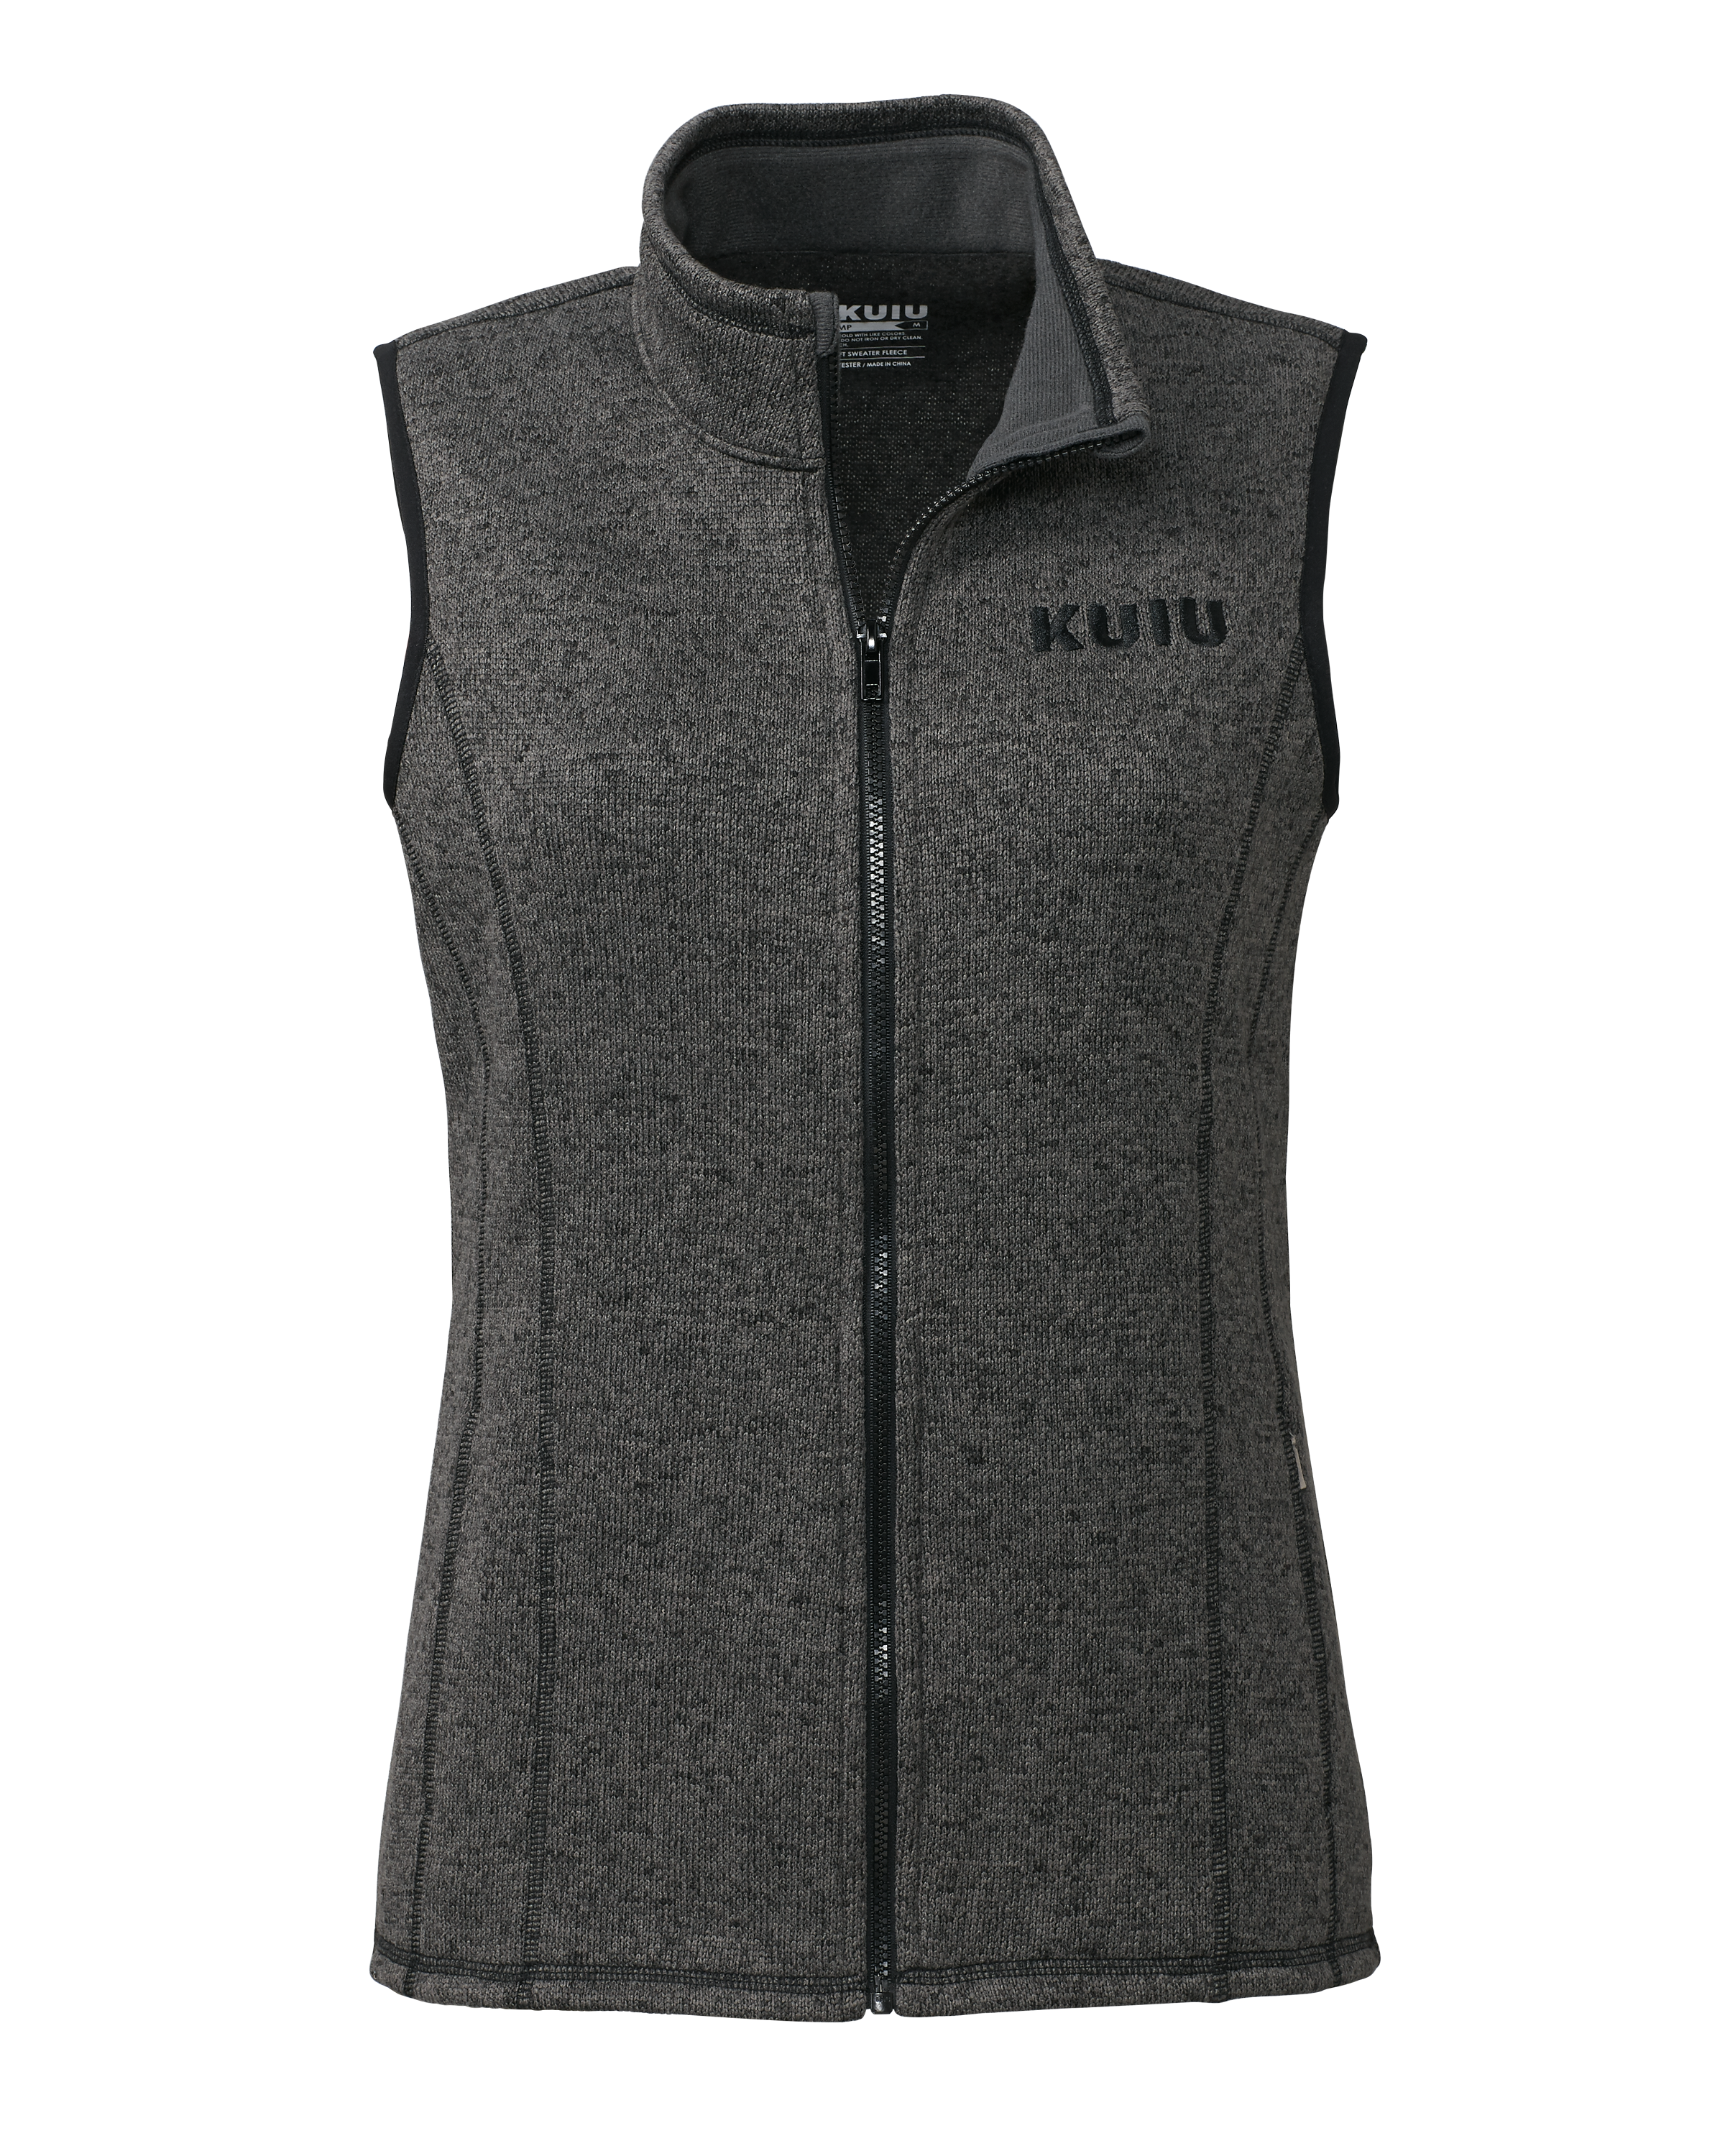 KUIU Women's Base Camp Sweater Vest in Charcoal | Large